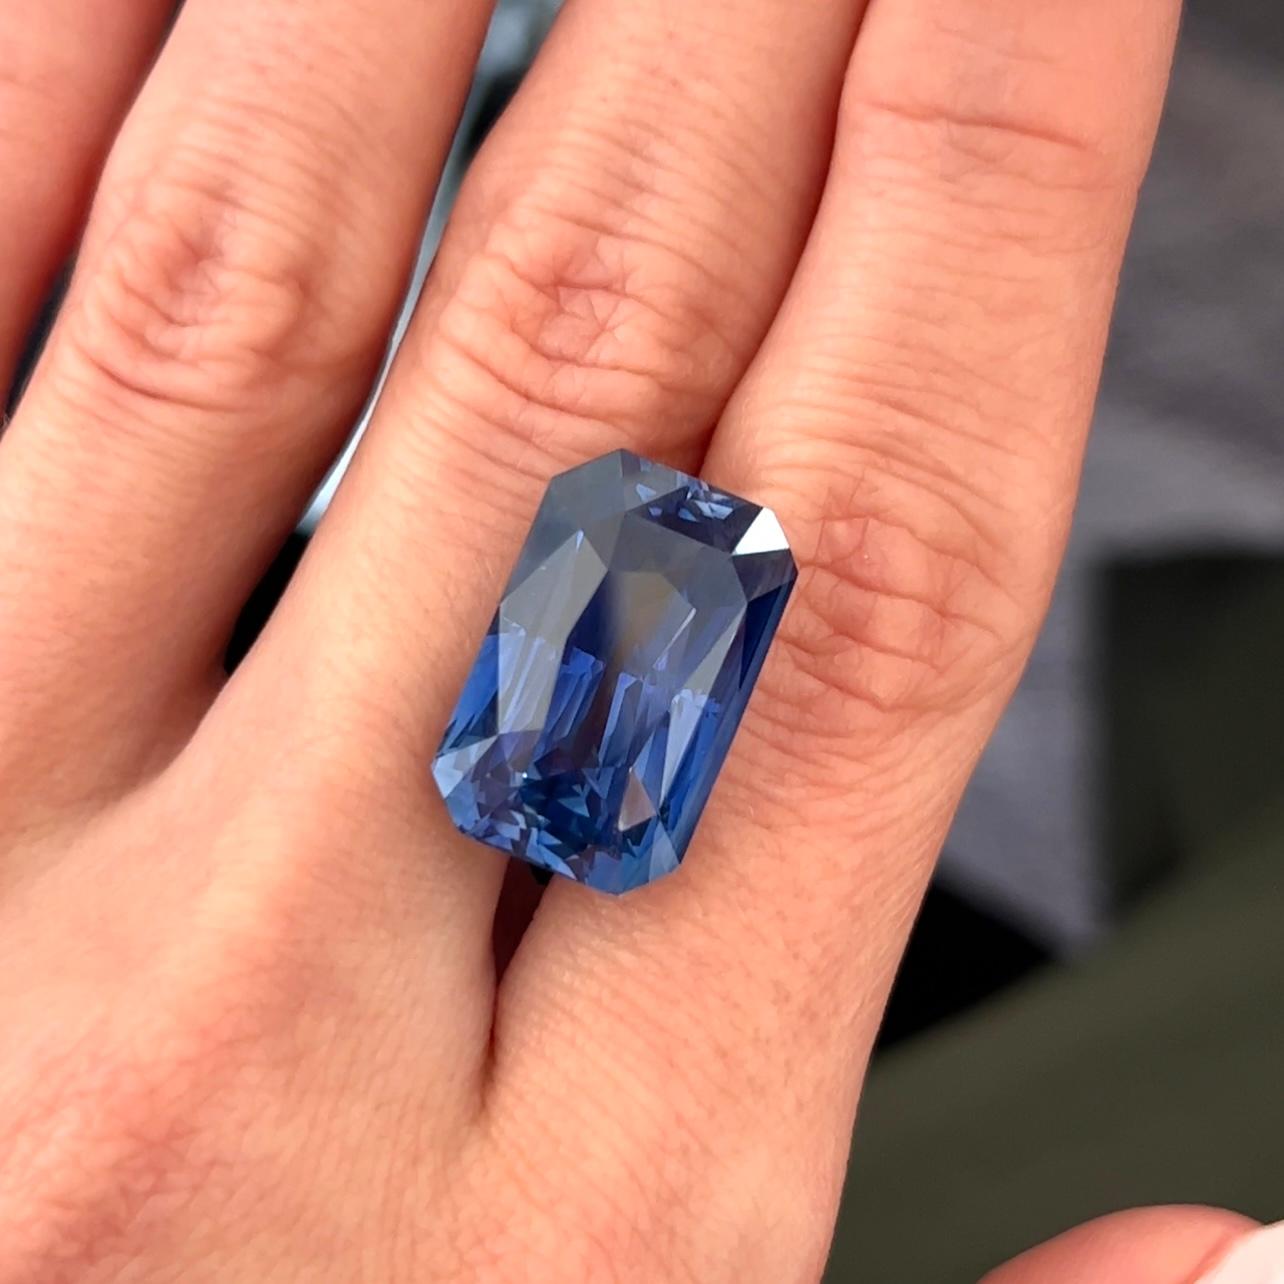 Sri Lanka is one of the best gemstone sources in the world.
Especially if we are speaking about sapphires. 
Sri lankan sapphires have very interesting hue that you can't mix up with other sapphires. 
This stone is one of the best samples of Sri